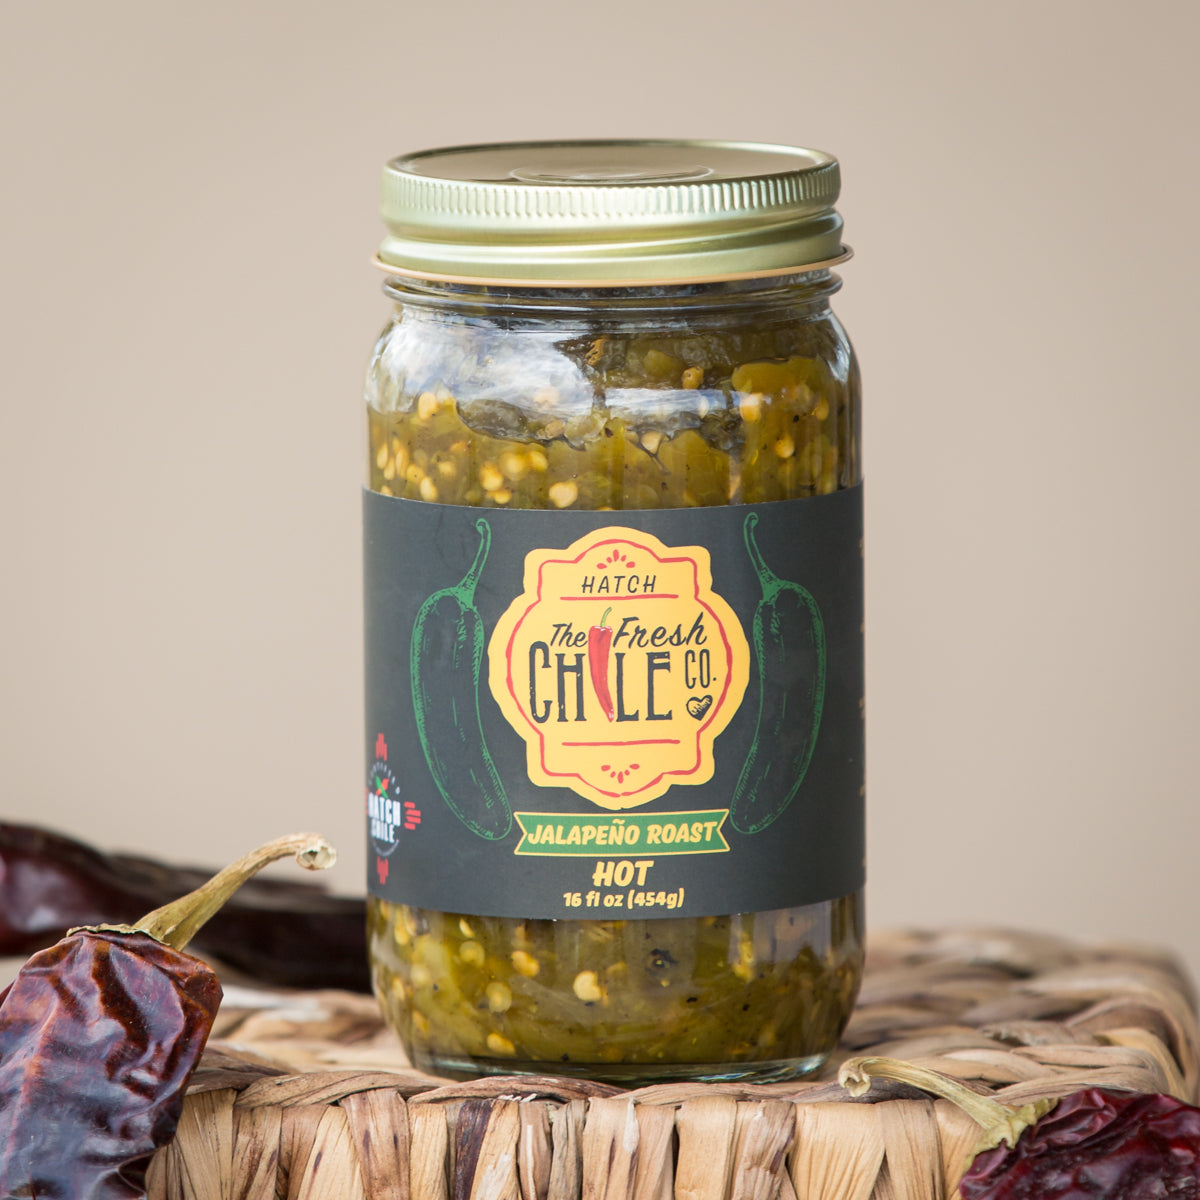 A jar of Hatch Green Jalapeño Roast pickles sits on a wicker surface, flanked by dried red chilies, with a light beige background.